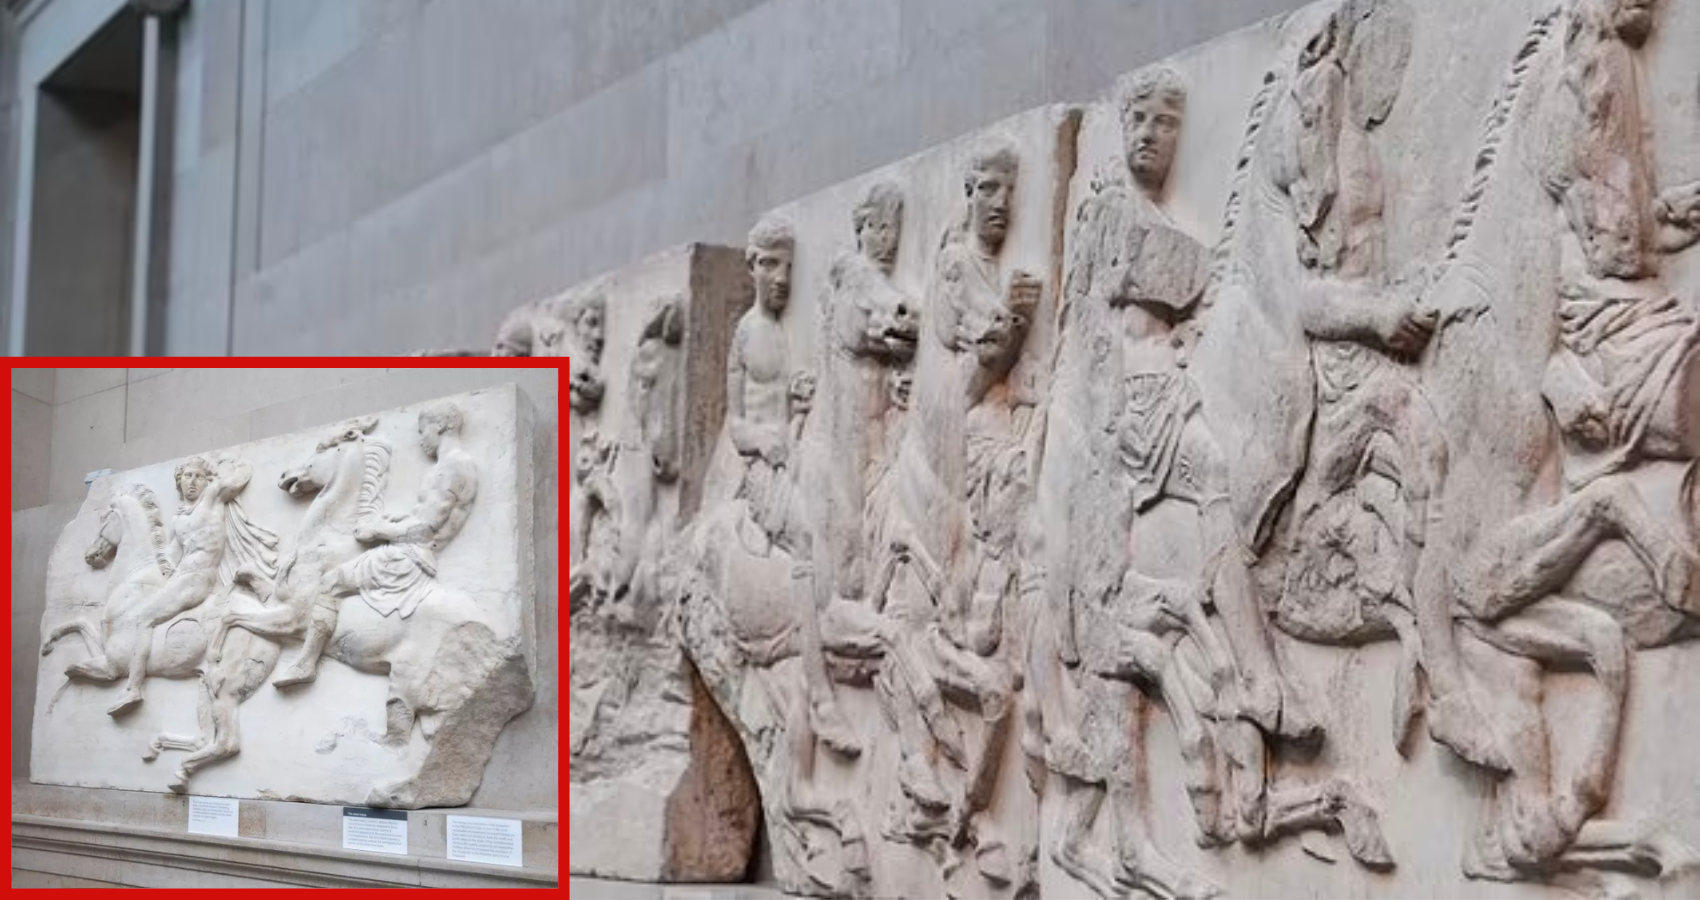 The Elgin Marbles may finally return to Greece, 200 years after being removed by British nobility